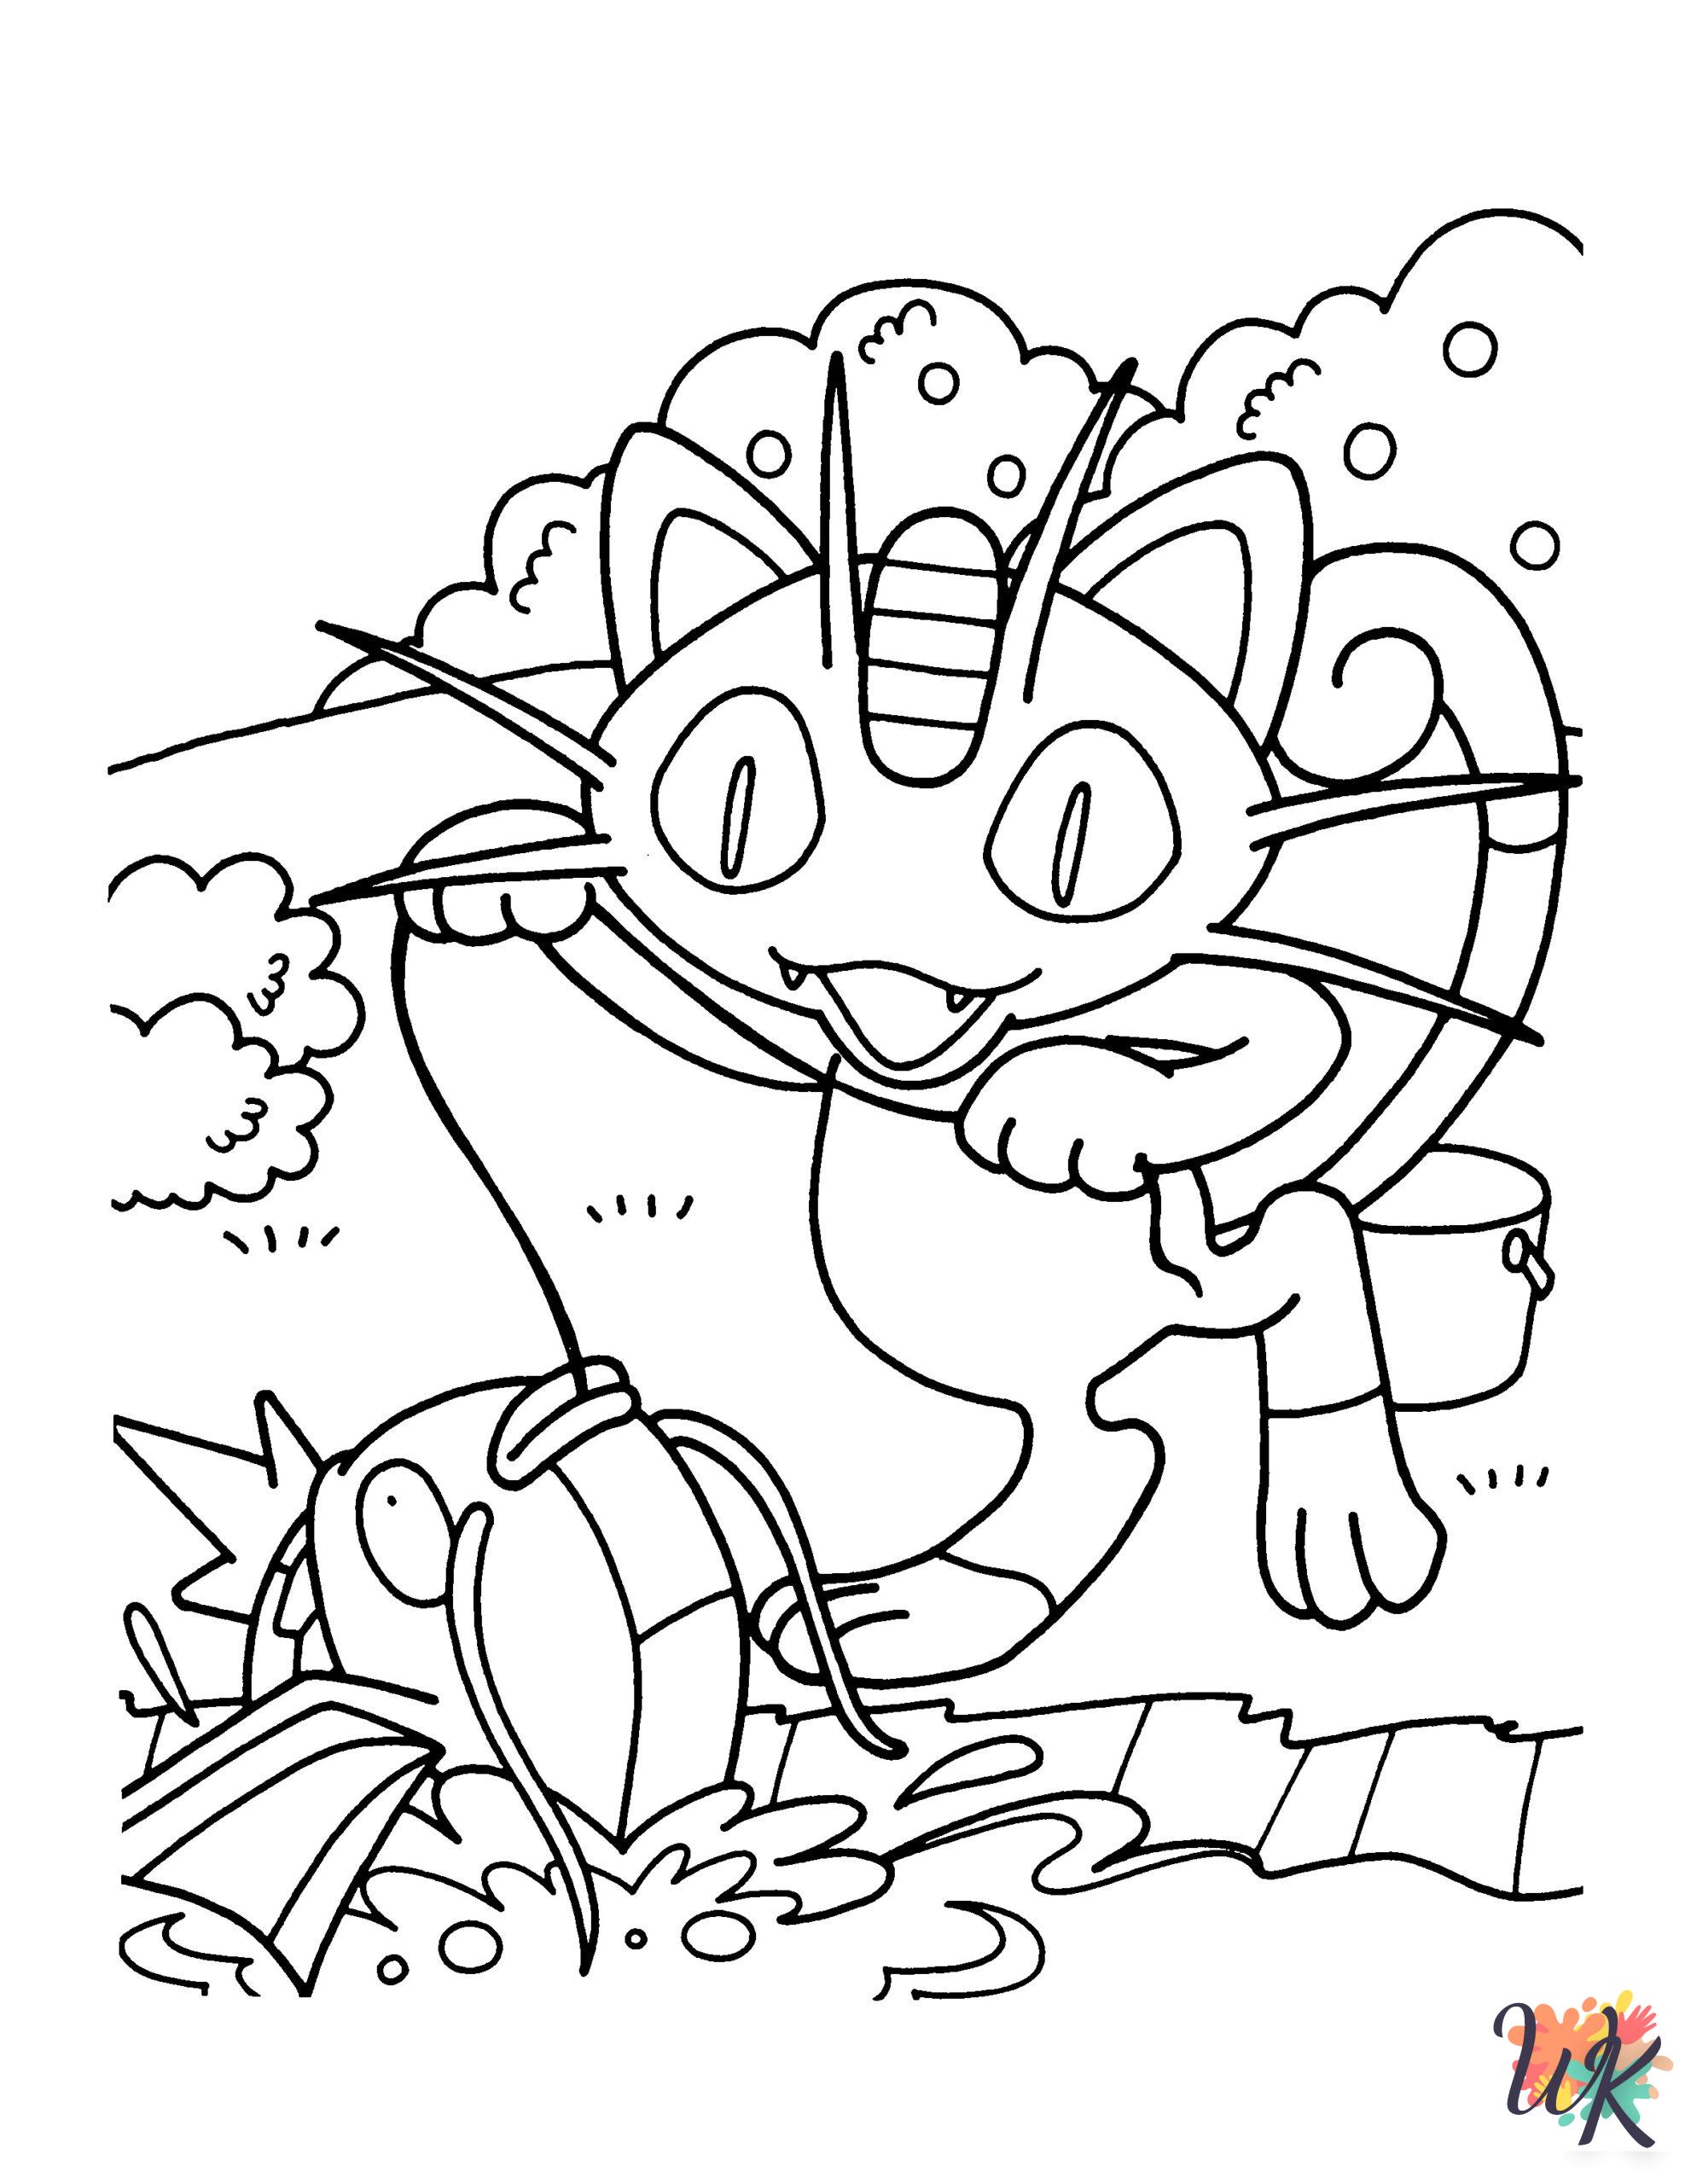 fun Meowth coloring pages